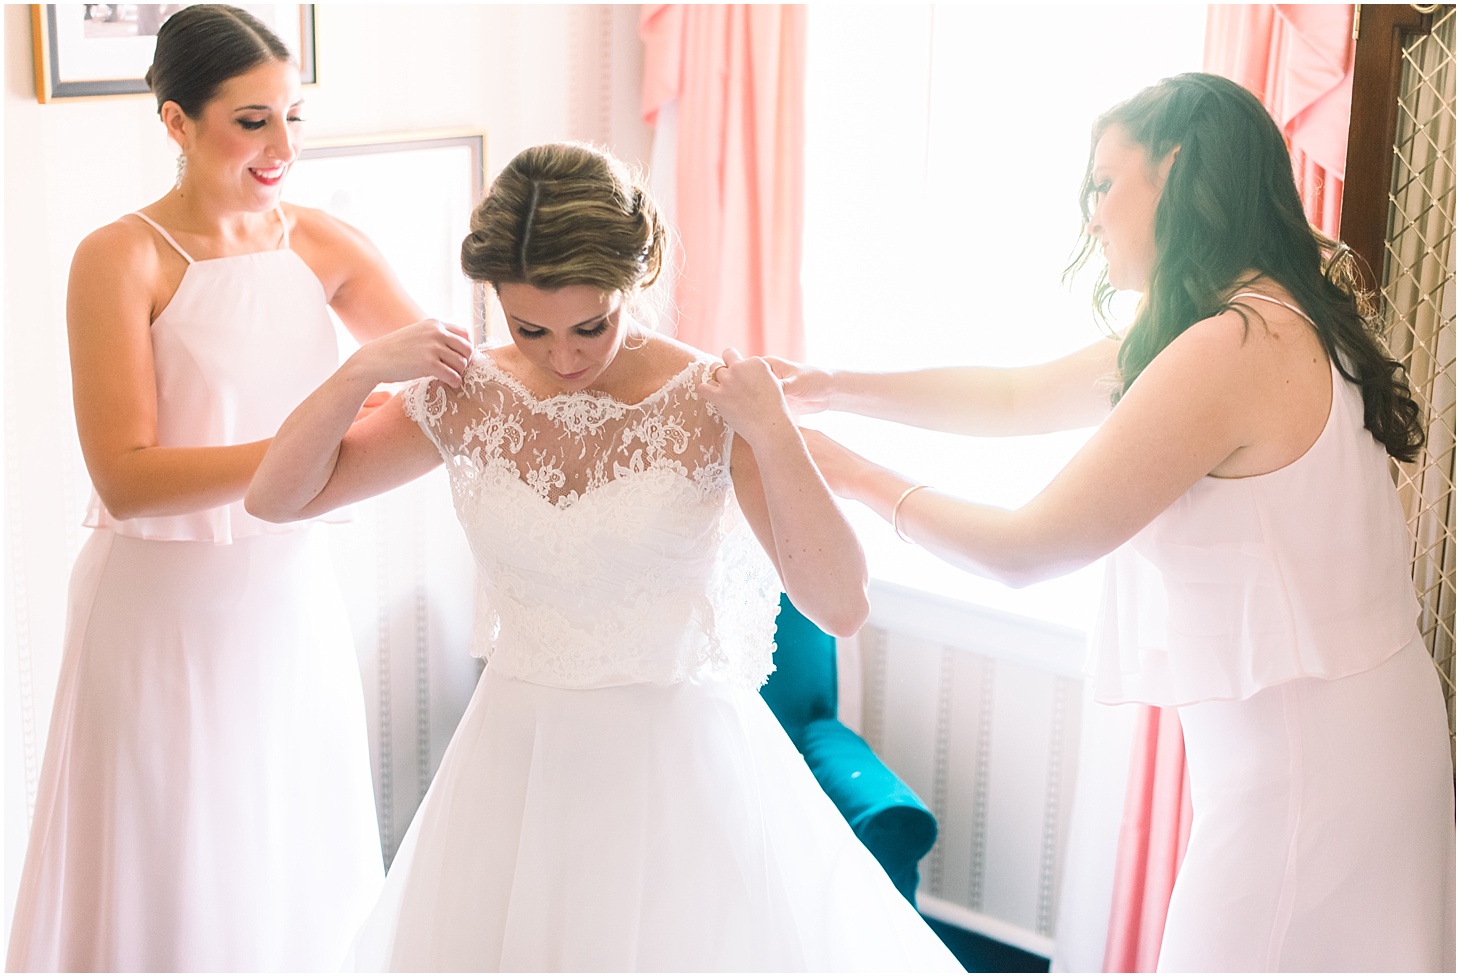 Bride Getting Ready in Custom Lace Bolero and Gown by Pronovias Wedding Gown | Blush and Black Tie Wedding in Williamsburg, VA | Sarah Bradshaw Photography